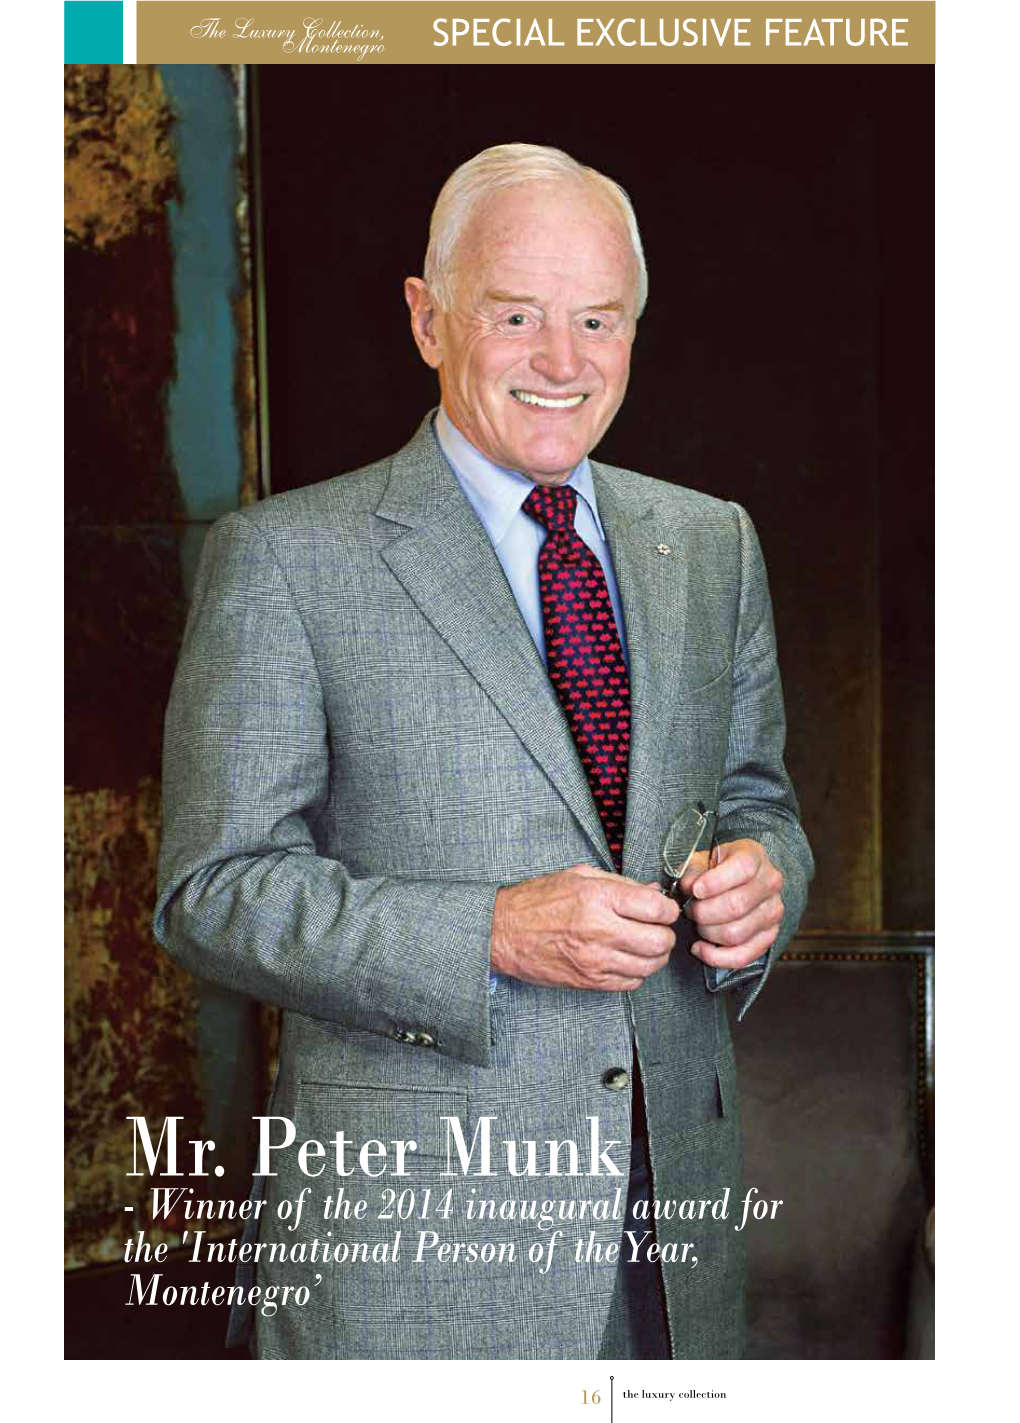 Mr. Peter Munk - Winner of the 2014 Inaugural Award for the 'International Person of Theyear, Montenegro’